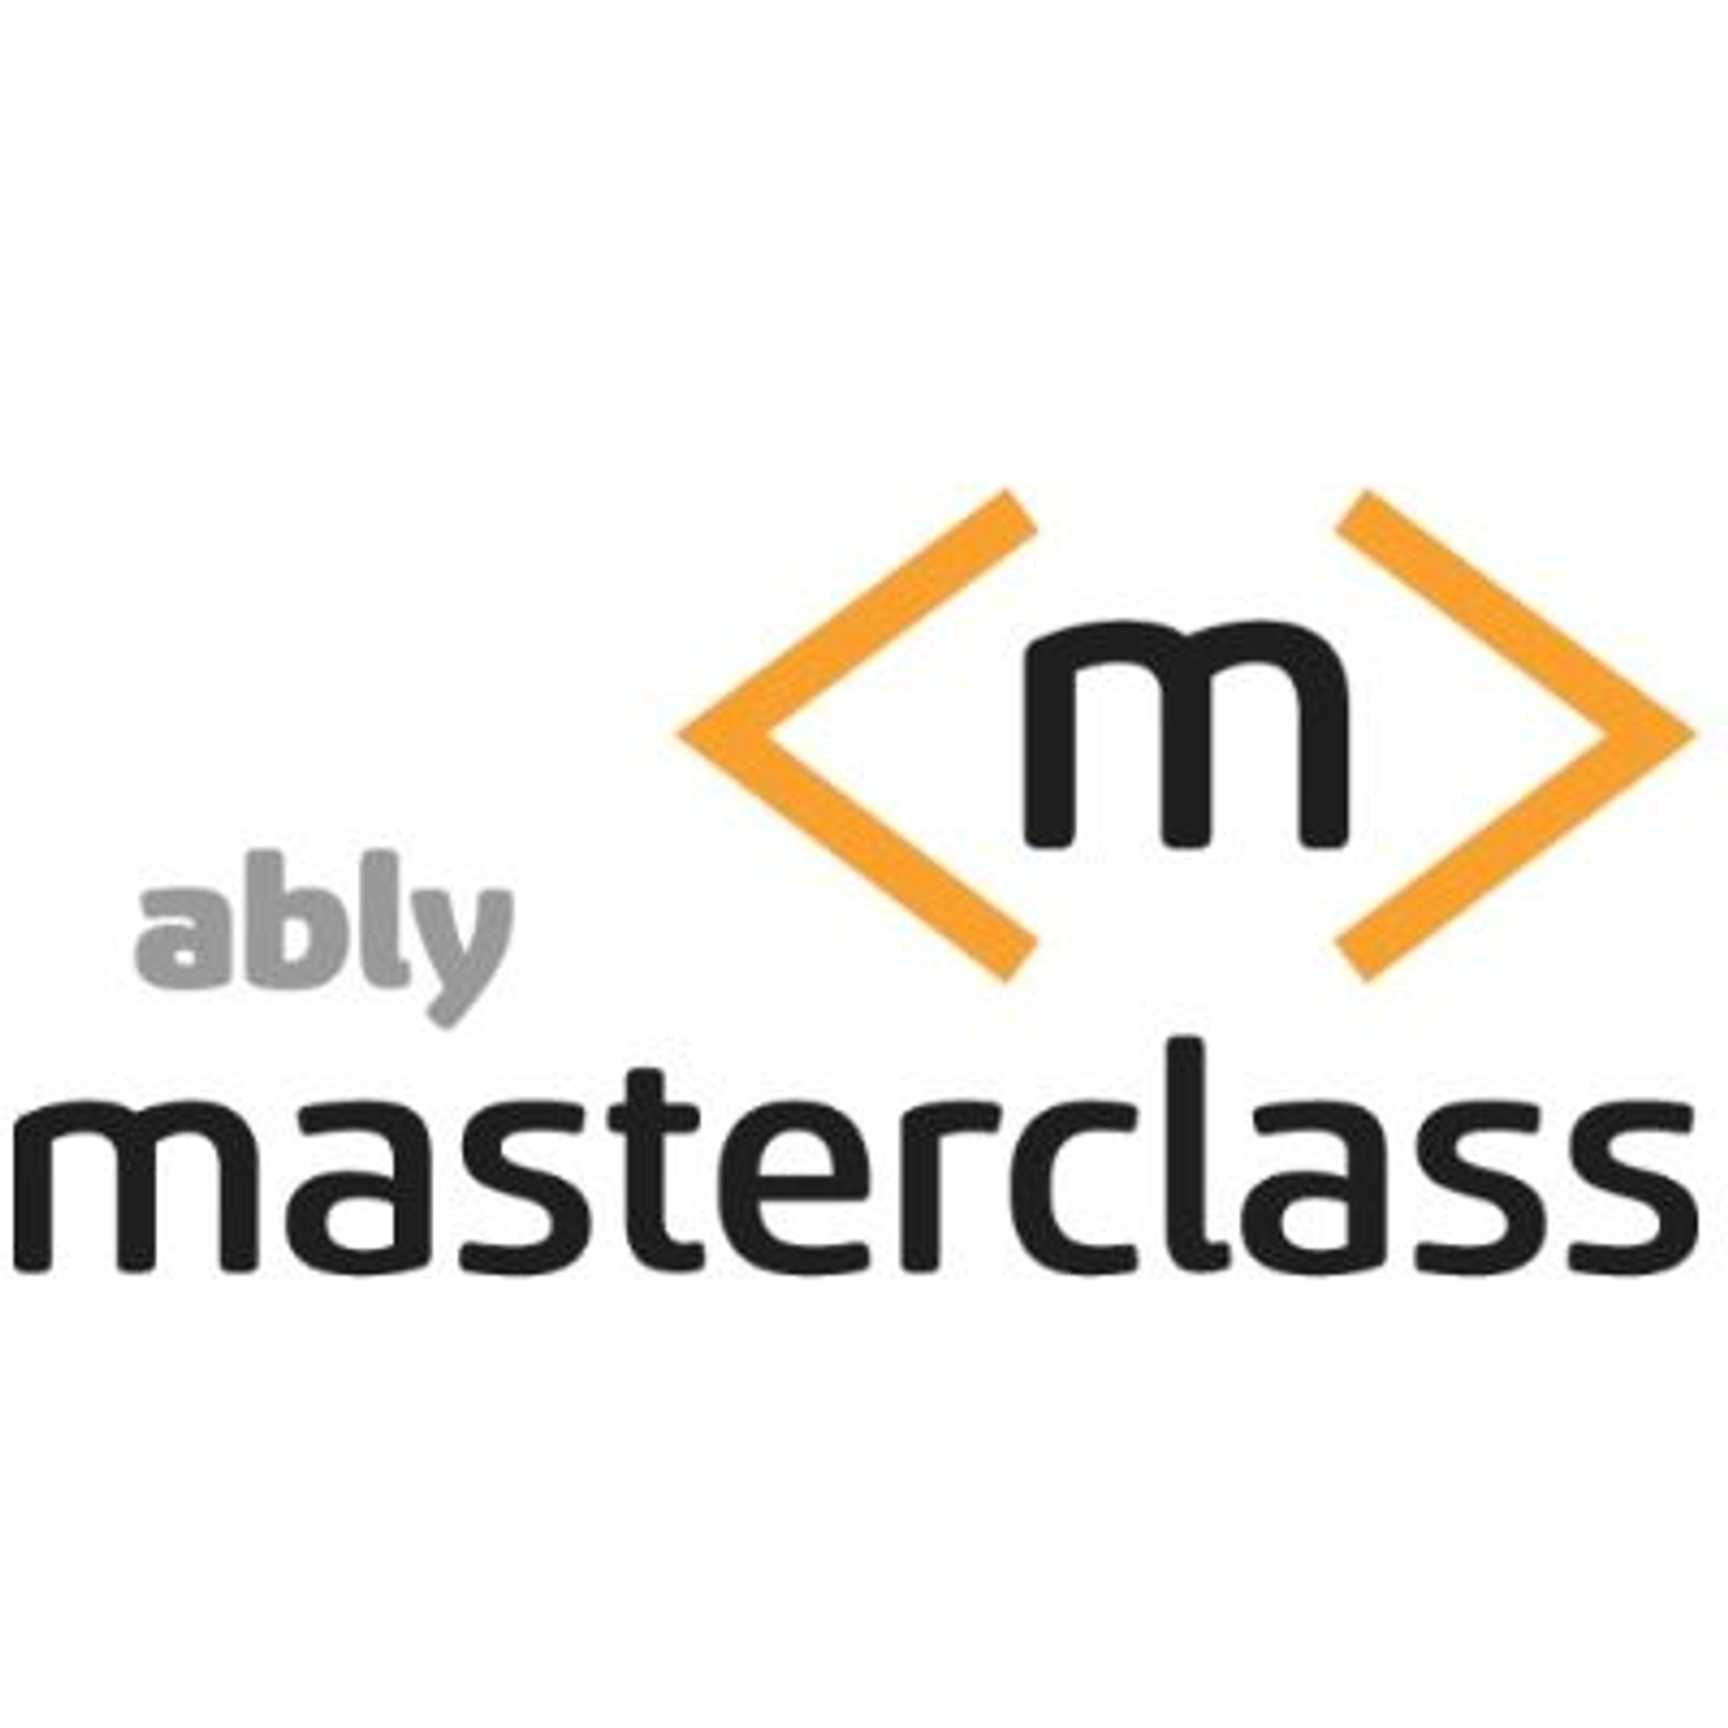 Ably Masterclass | Episode 1 - Building a realtime voting app in less than an hour